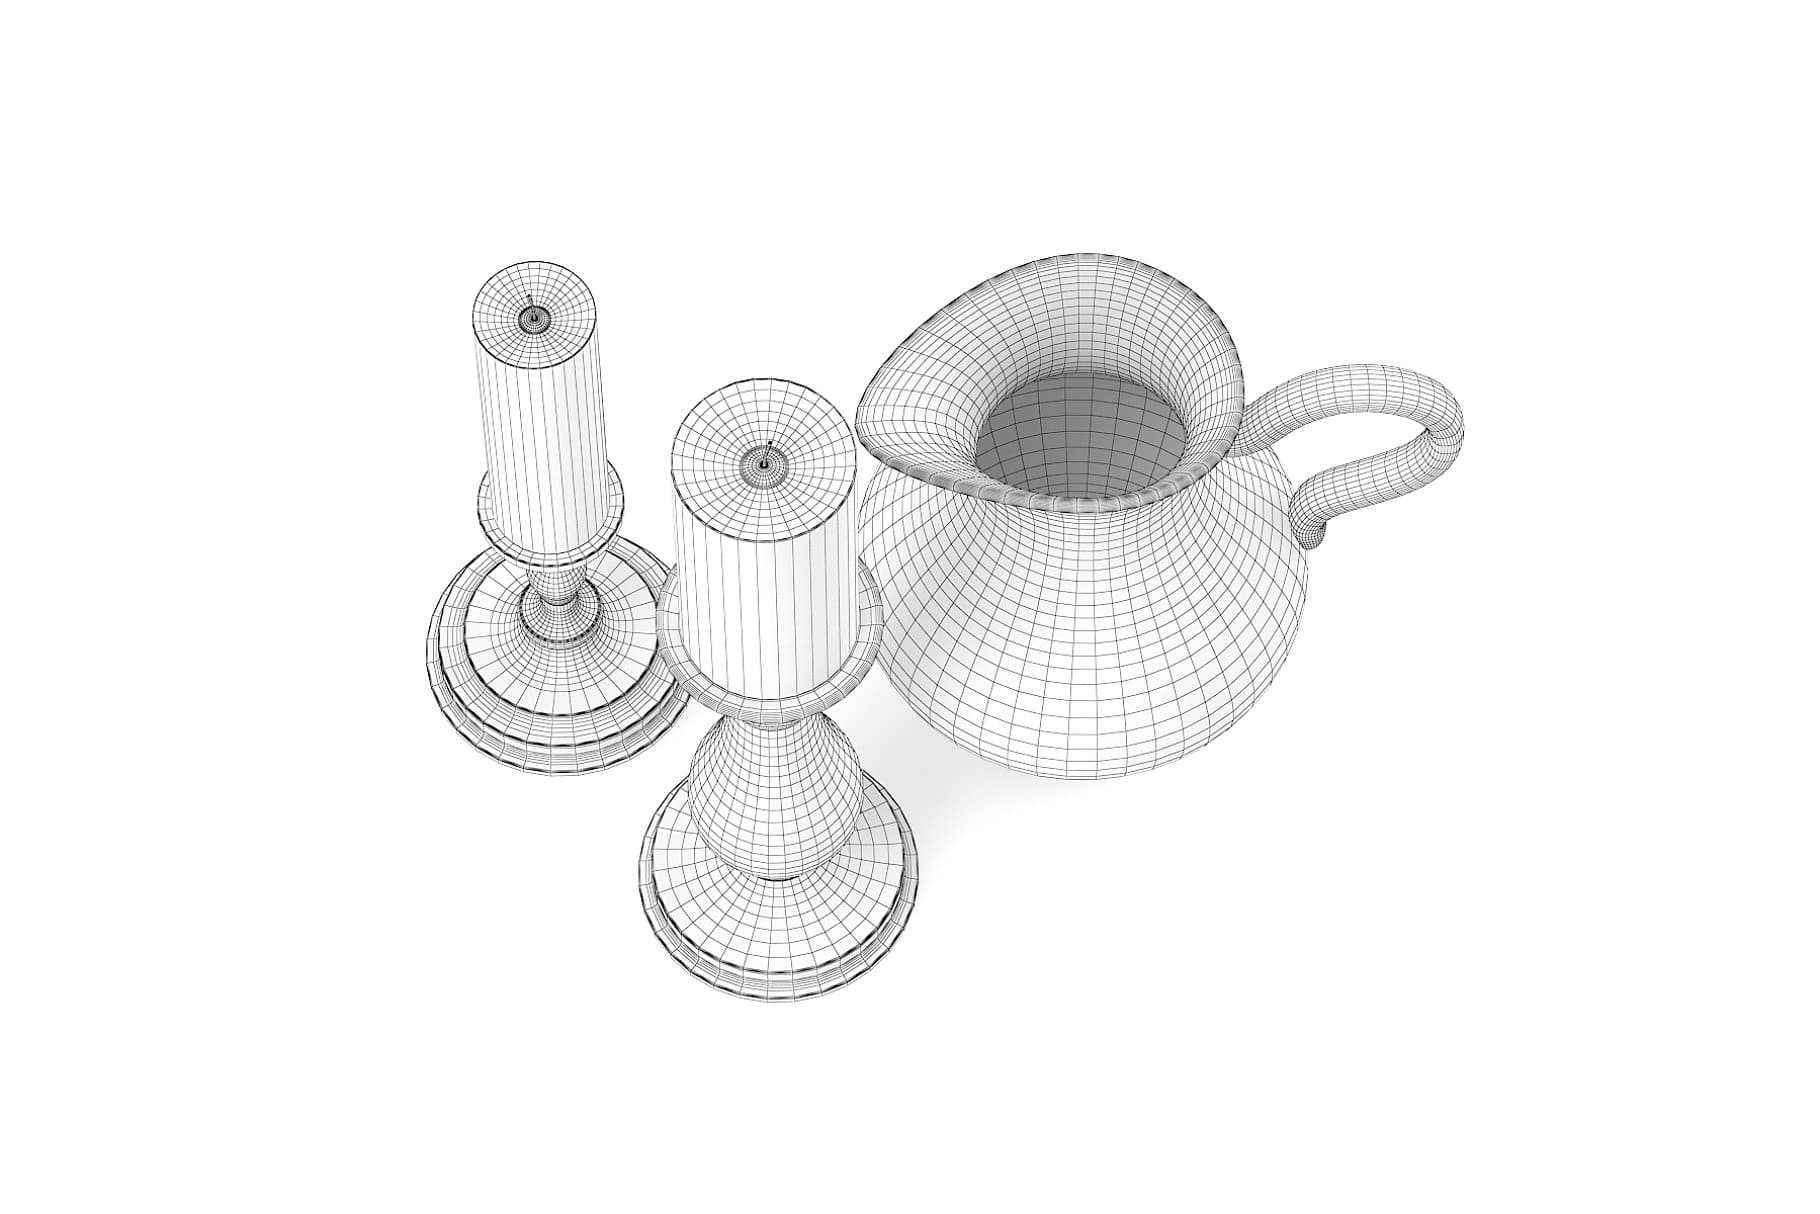 Top view of 3D model of two candles and a mug.